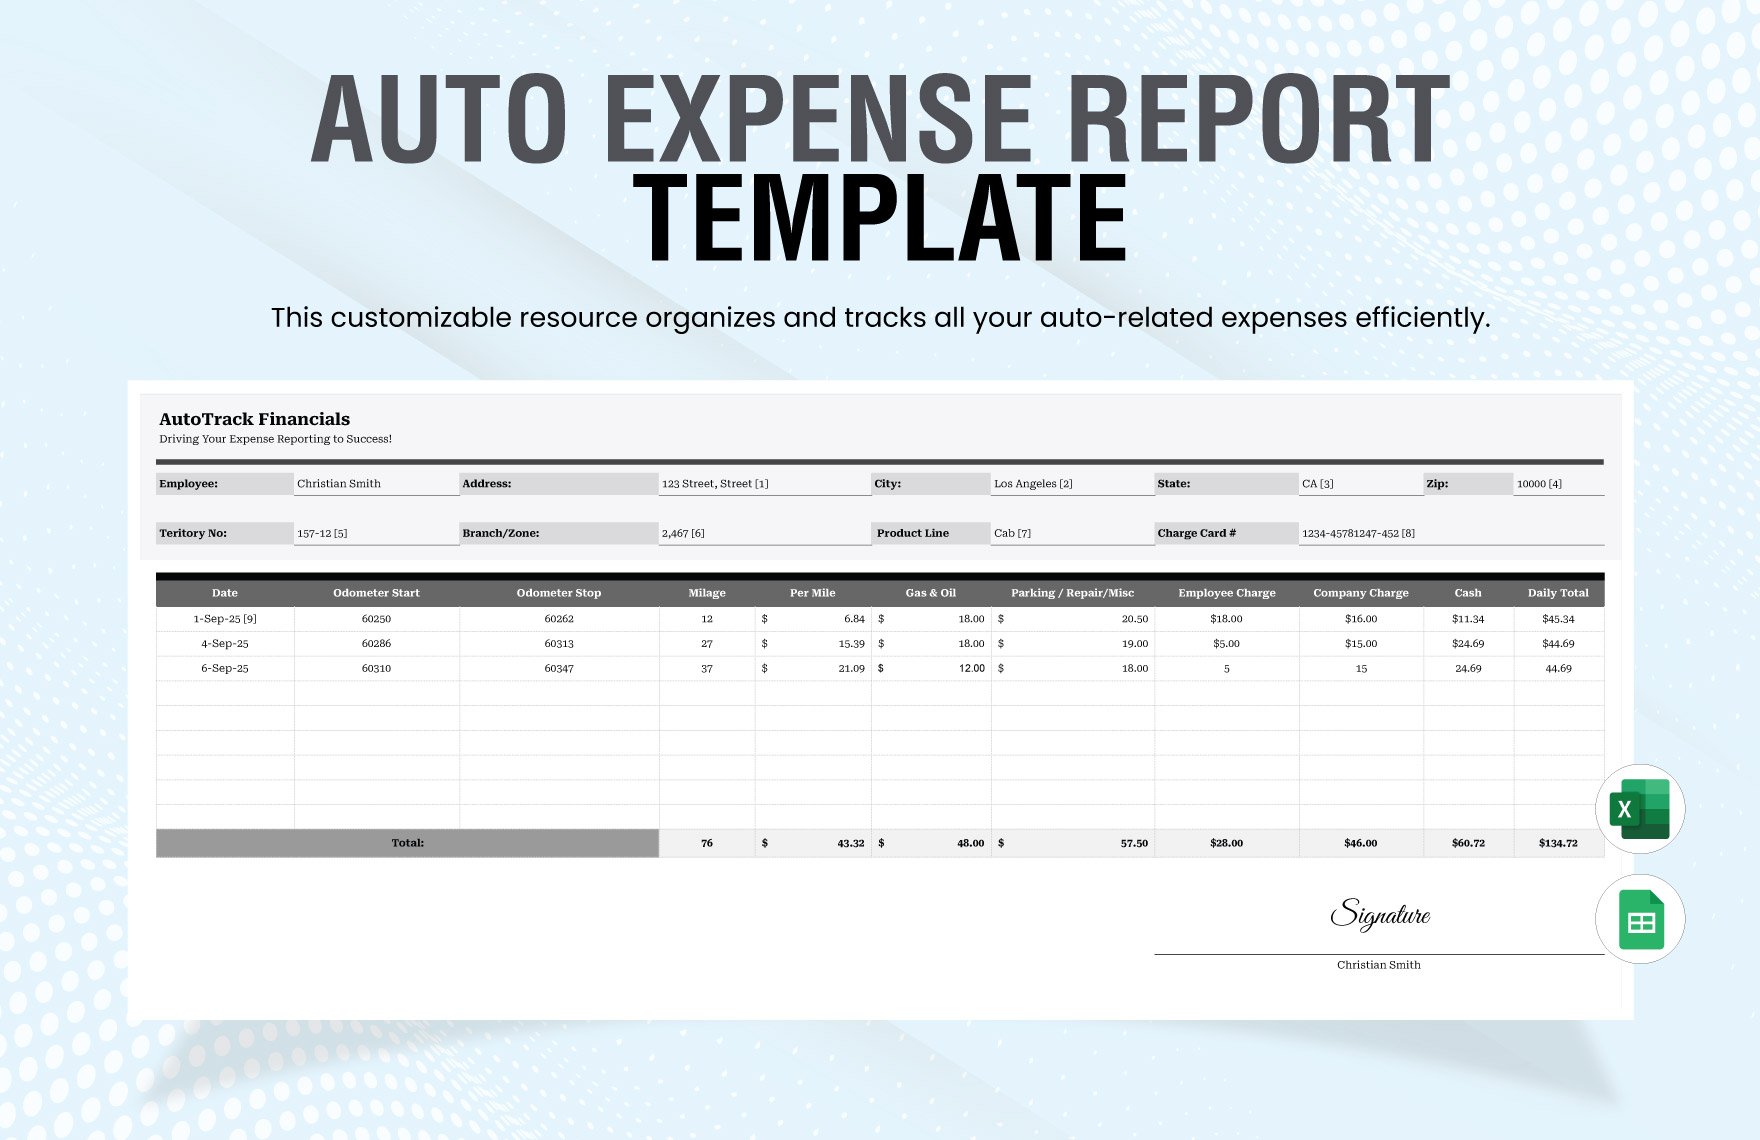 Auto Expense Report Template in Excel, Google Sheets